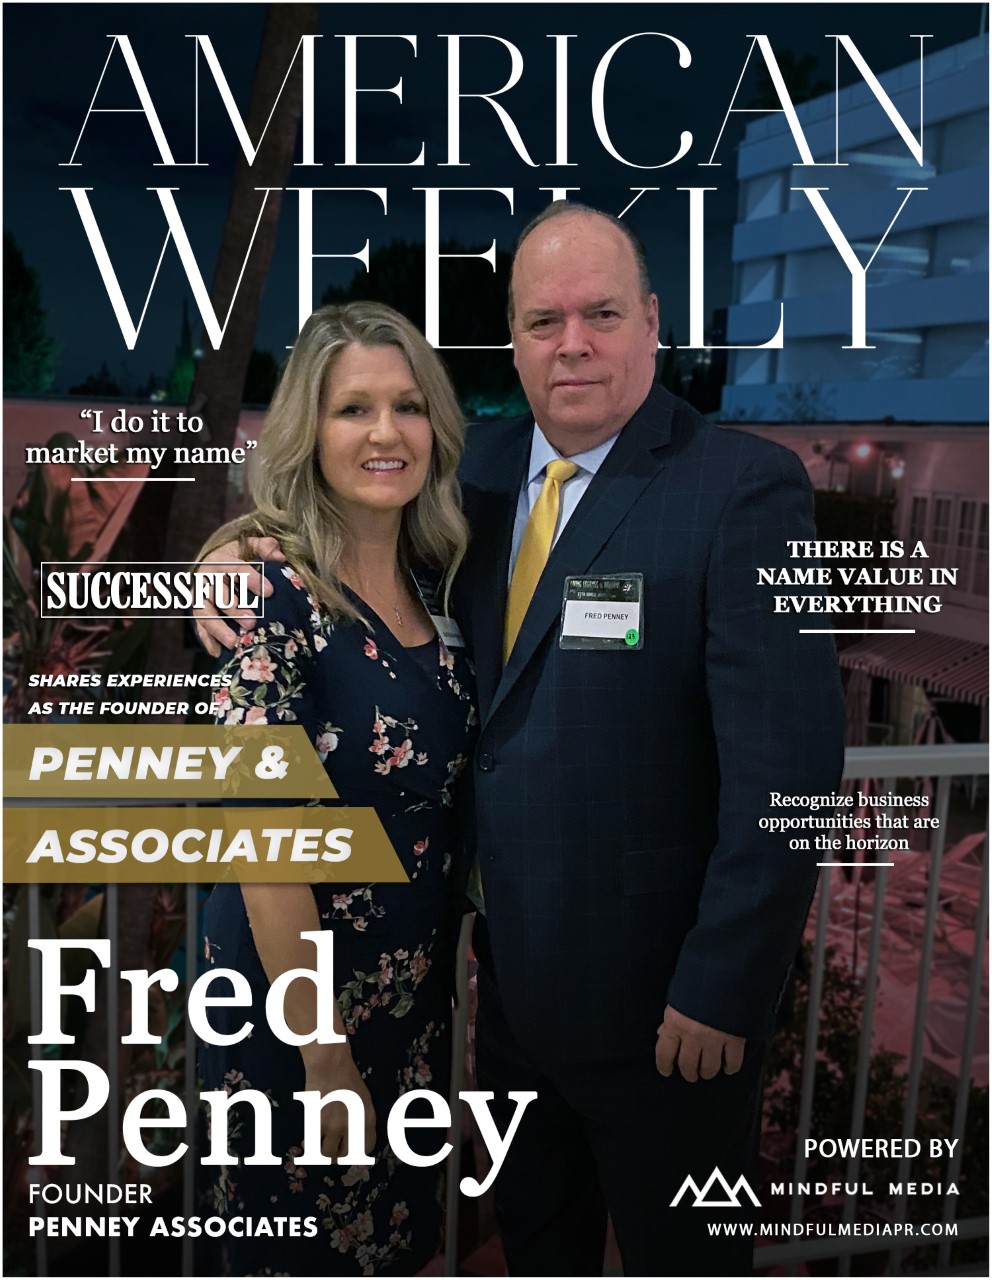 Business Innovator and Pioneer, Frederick Penney, Shares His Experiences as the Founder of Penney & Associates Law Firm 